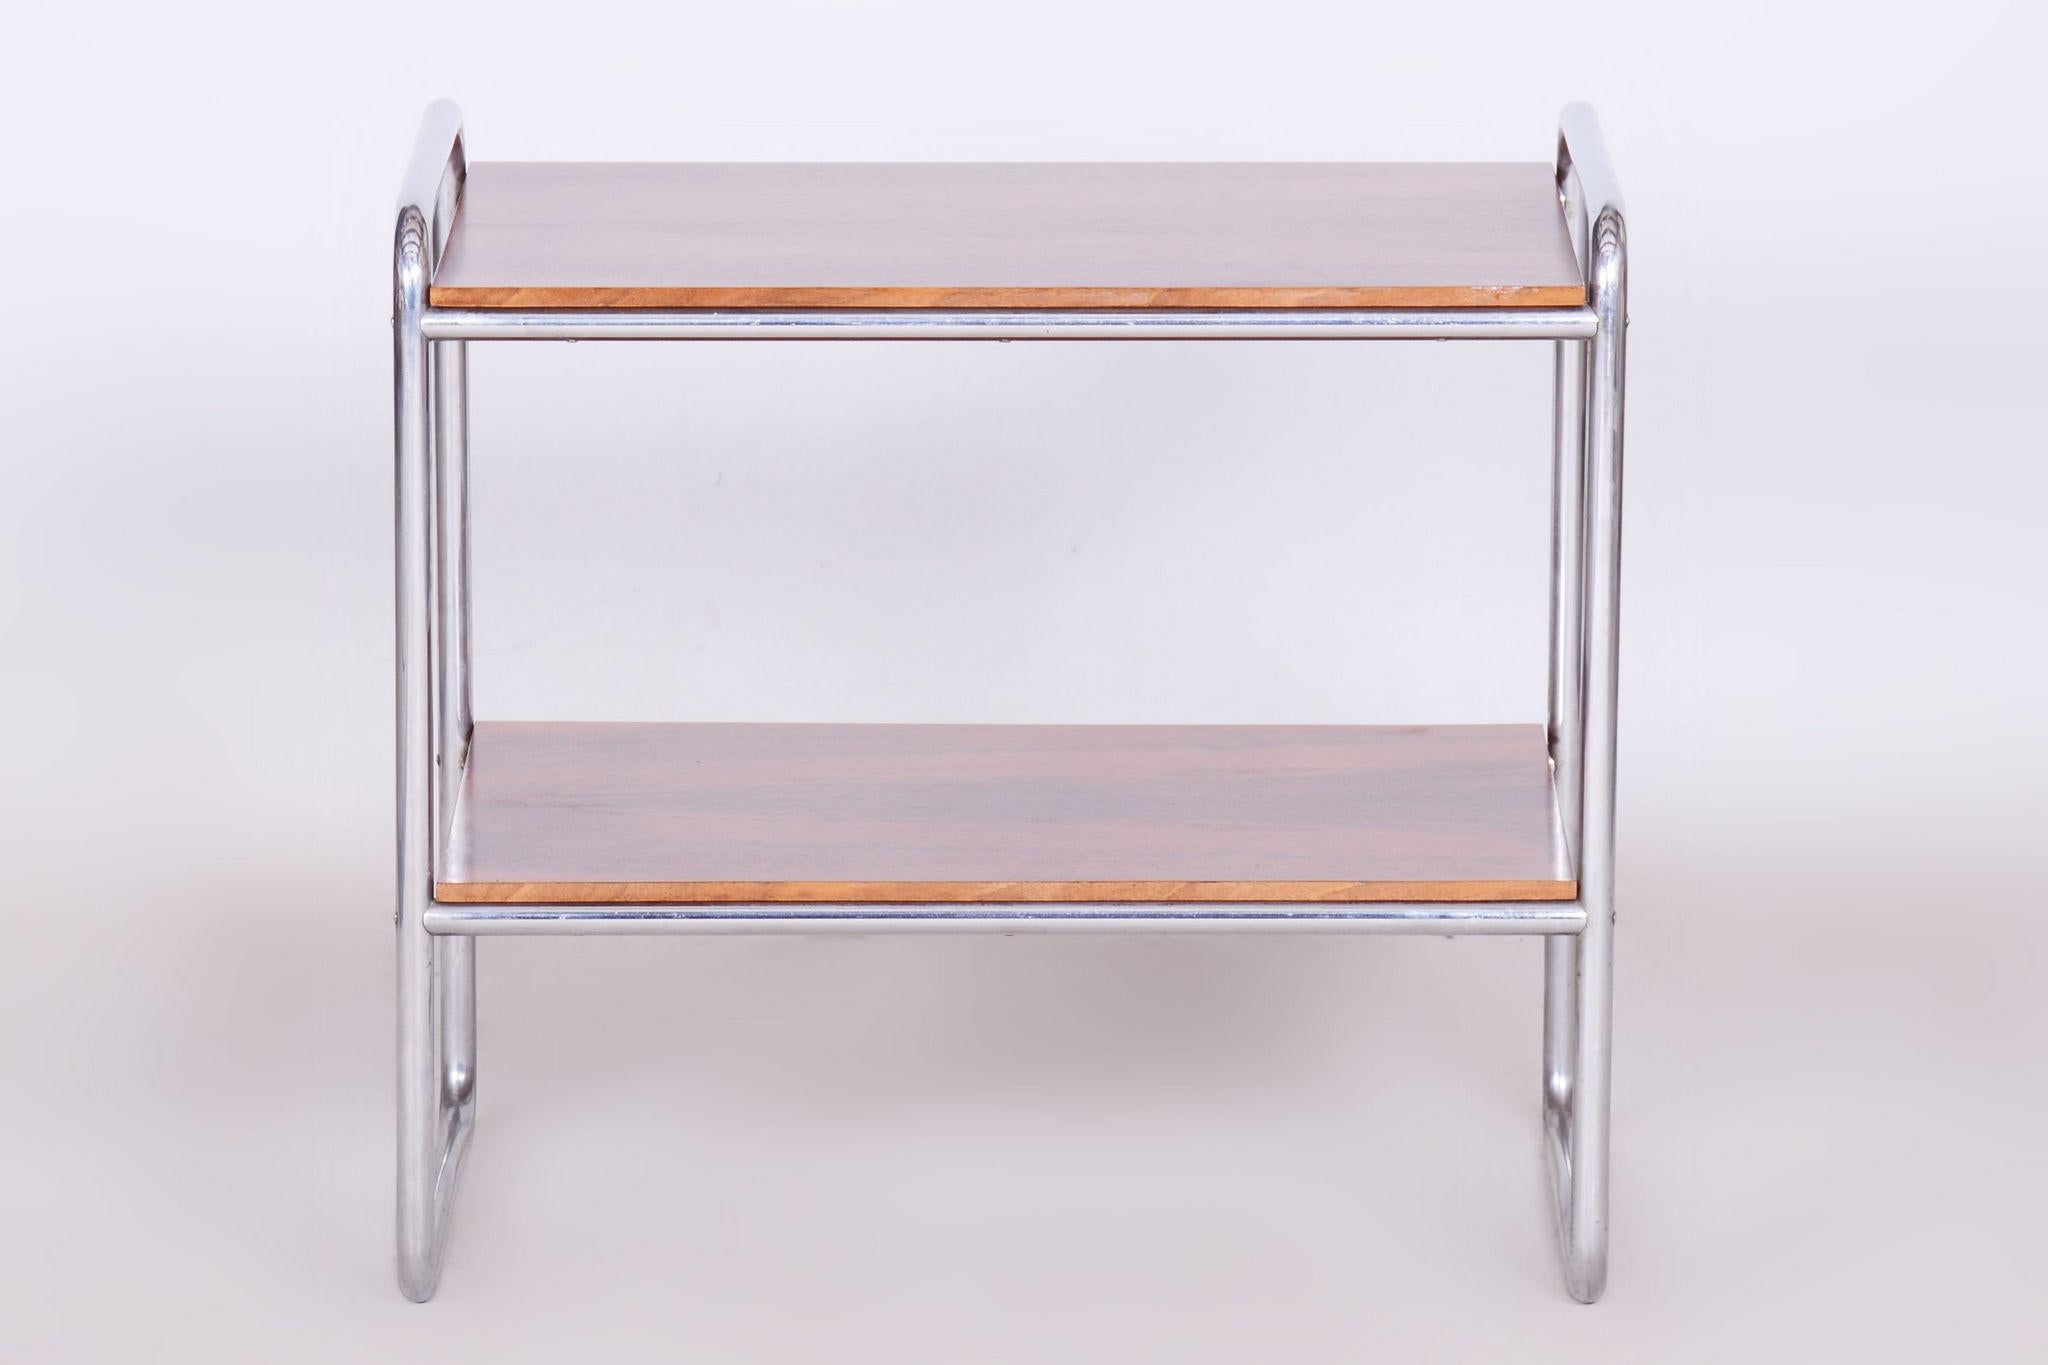 Mid-20th Century Restored Bauhaus Side Table, Walnut, Chrome-Plated Steel, Czech, 1930s For Sale